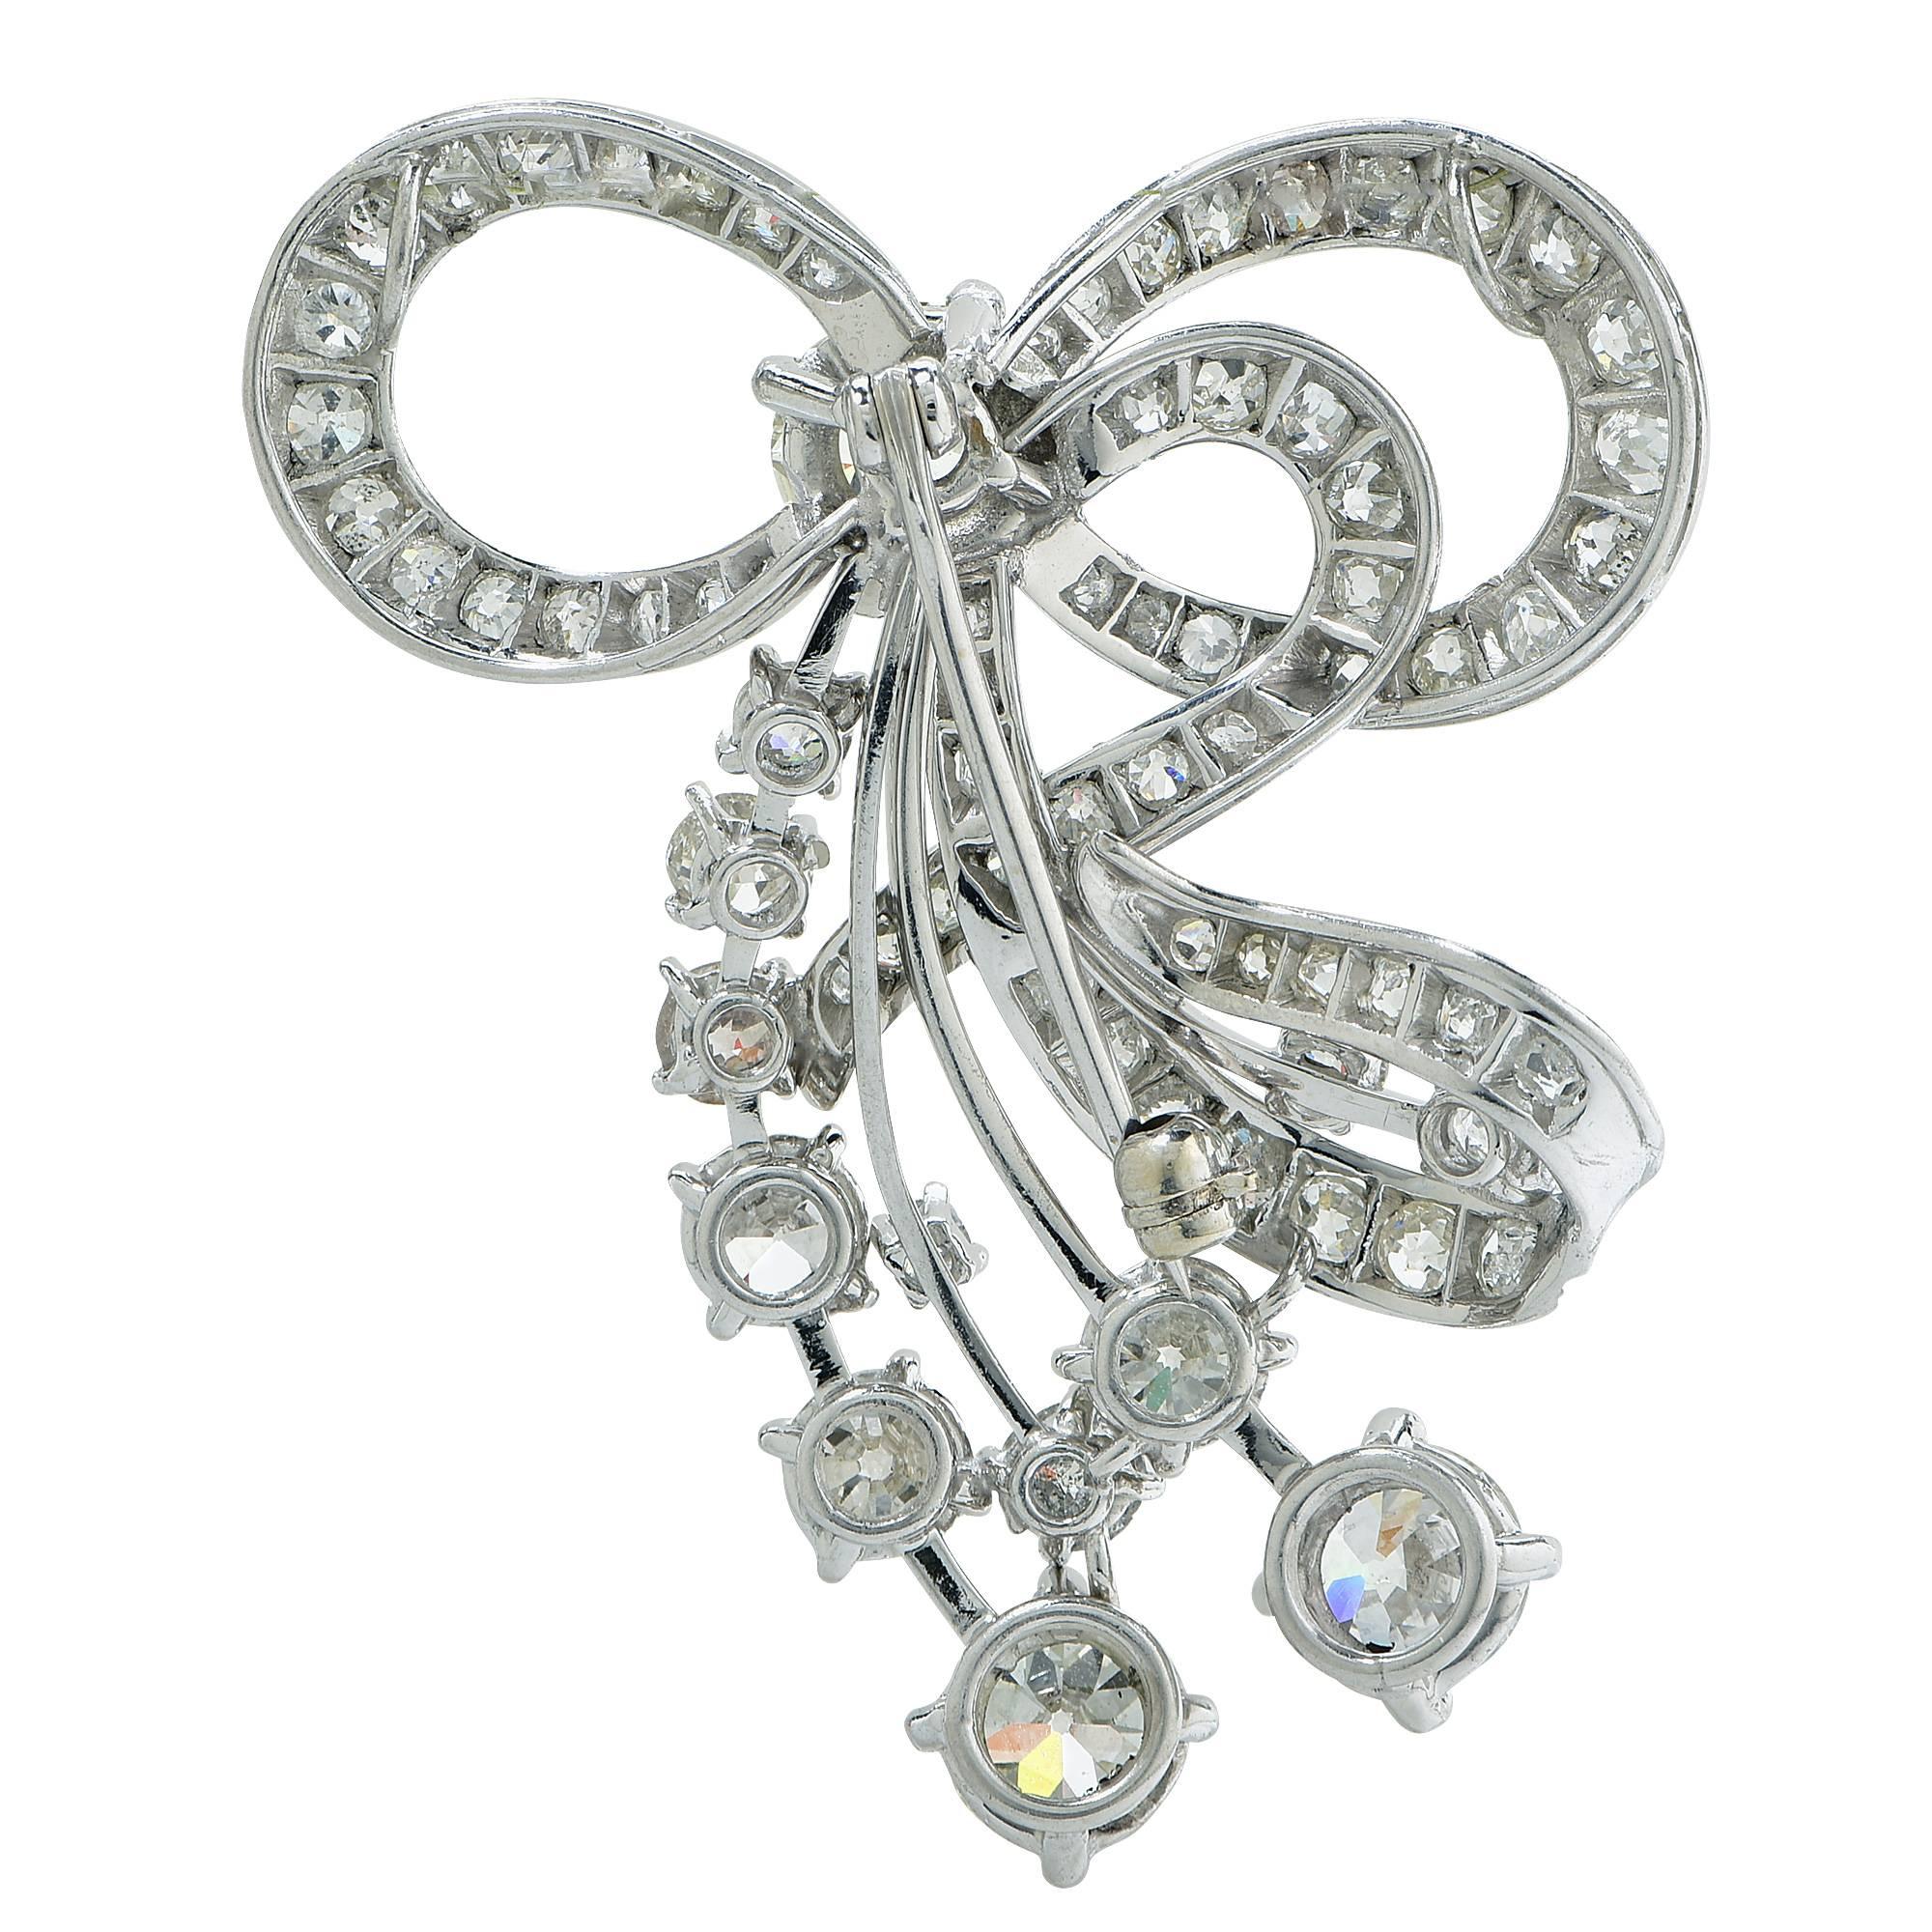 Platinum brooch featuring 71 old European cut diamonds weighing 4.70cts total G-K color VS-SI clarity.

Metal weight: 14.61 grams

This diamond brooch is accompanied by a retail appraisal performed by a GIA Graduate Gemologist.